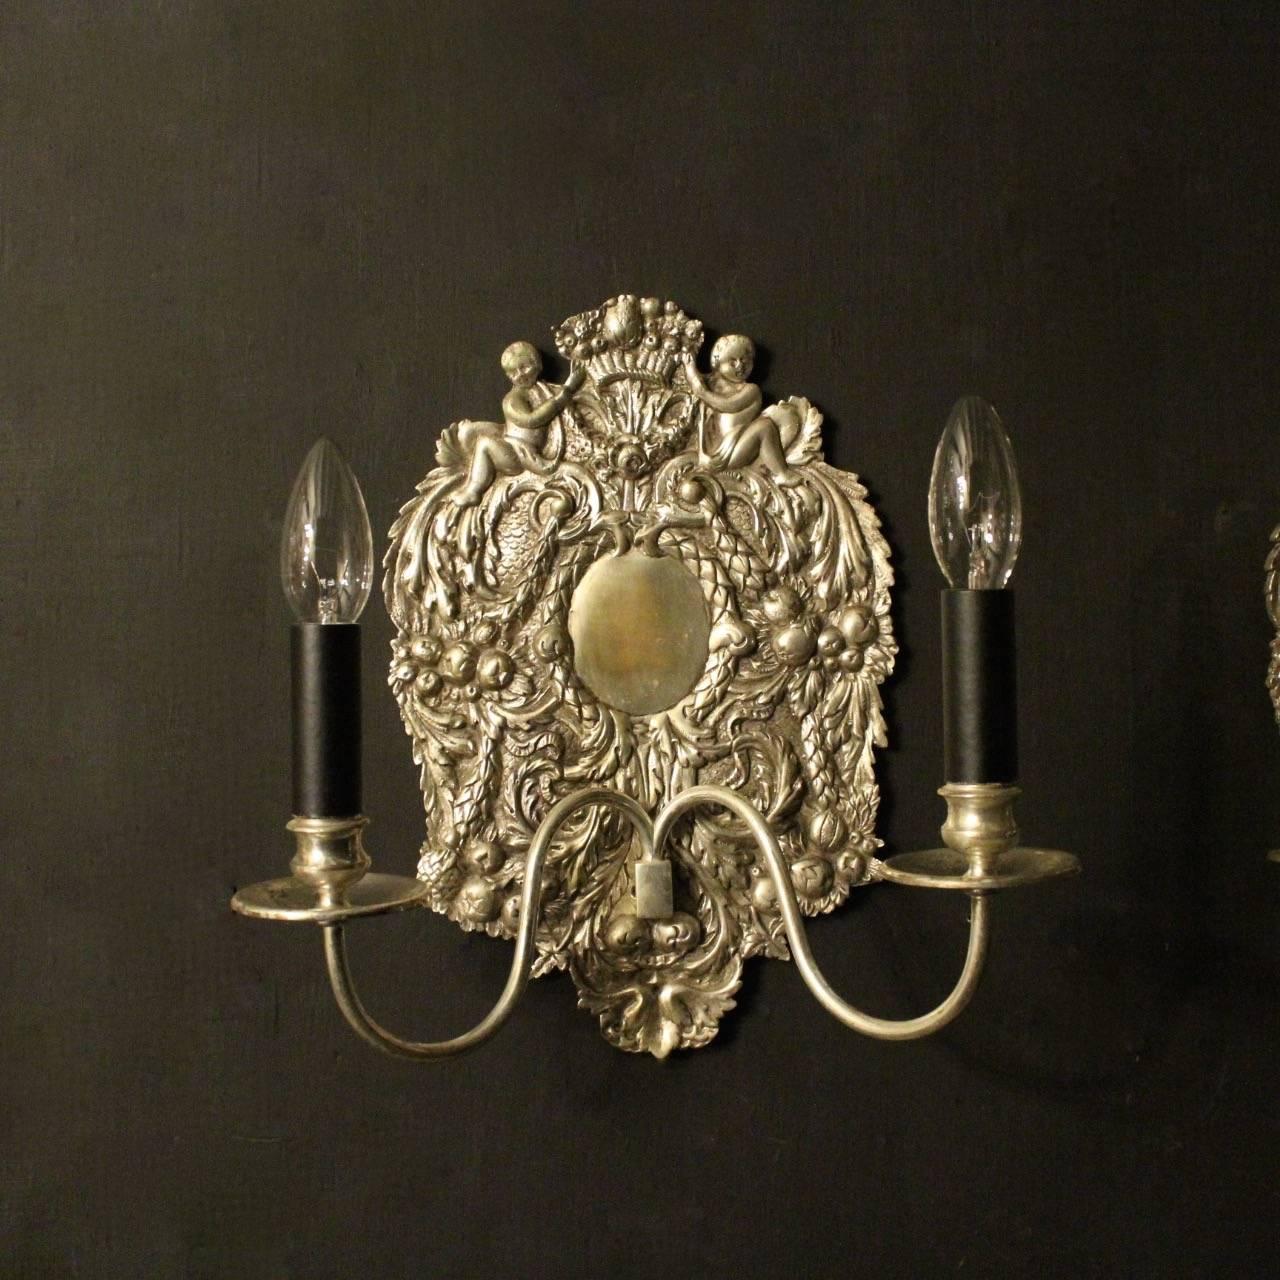 English set of four twin arm silvered cast brass antique wall lights, the scrolling arms with circular cast drip pans and turned candle sconces, issuing from foliated leaf and grape backplate with an ornate finial of a pair of cherubs holding a